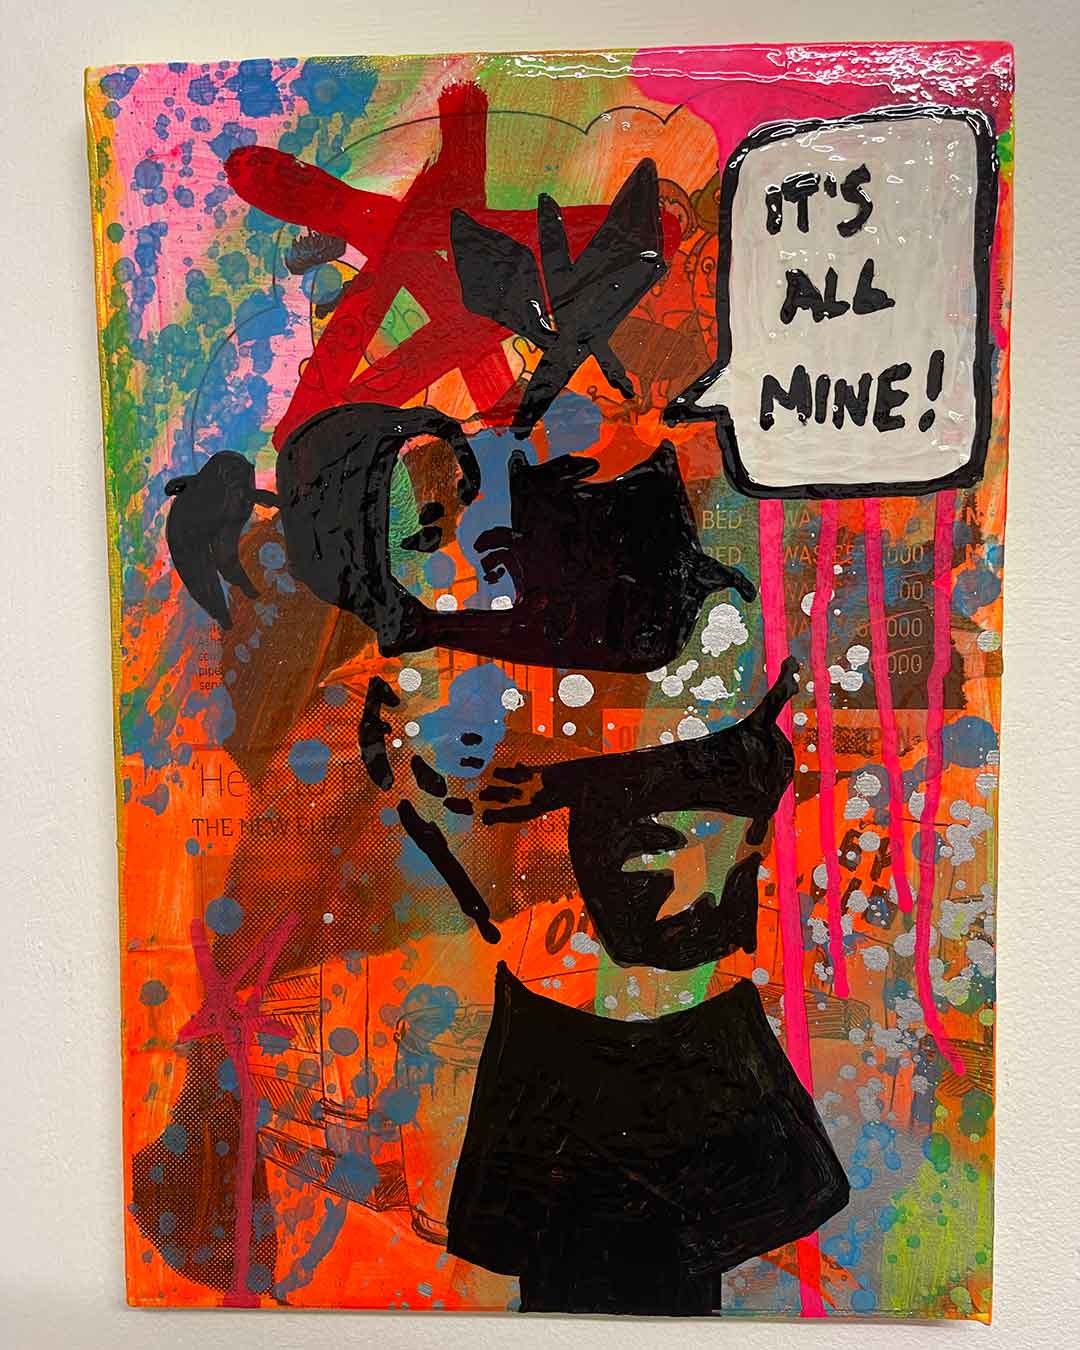 All mine after Banksy Painting by Barrie J Davies 2022, Mixed media on Canvas, 21cm x 29cm, Unframed and ready to hang.